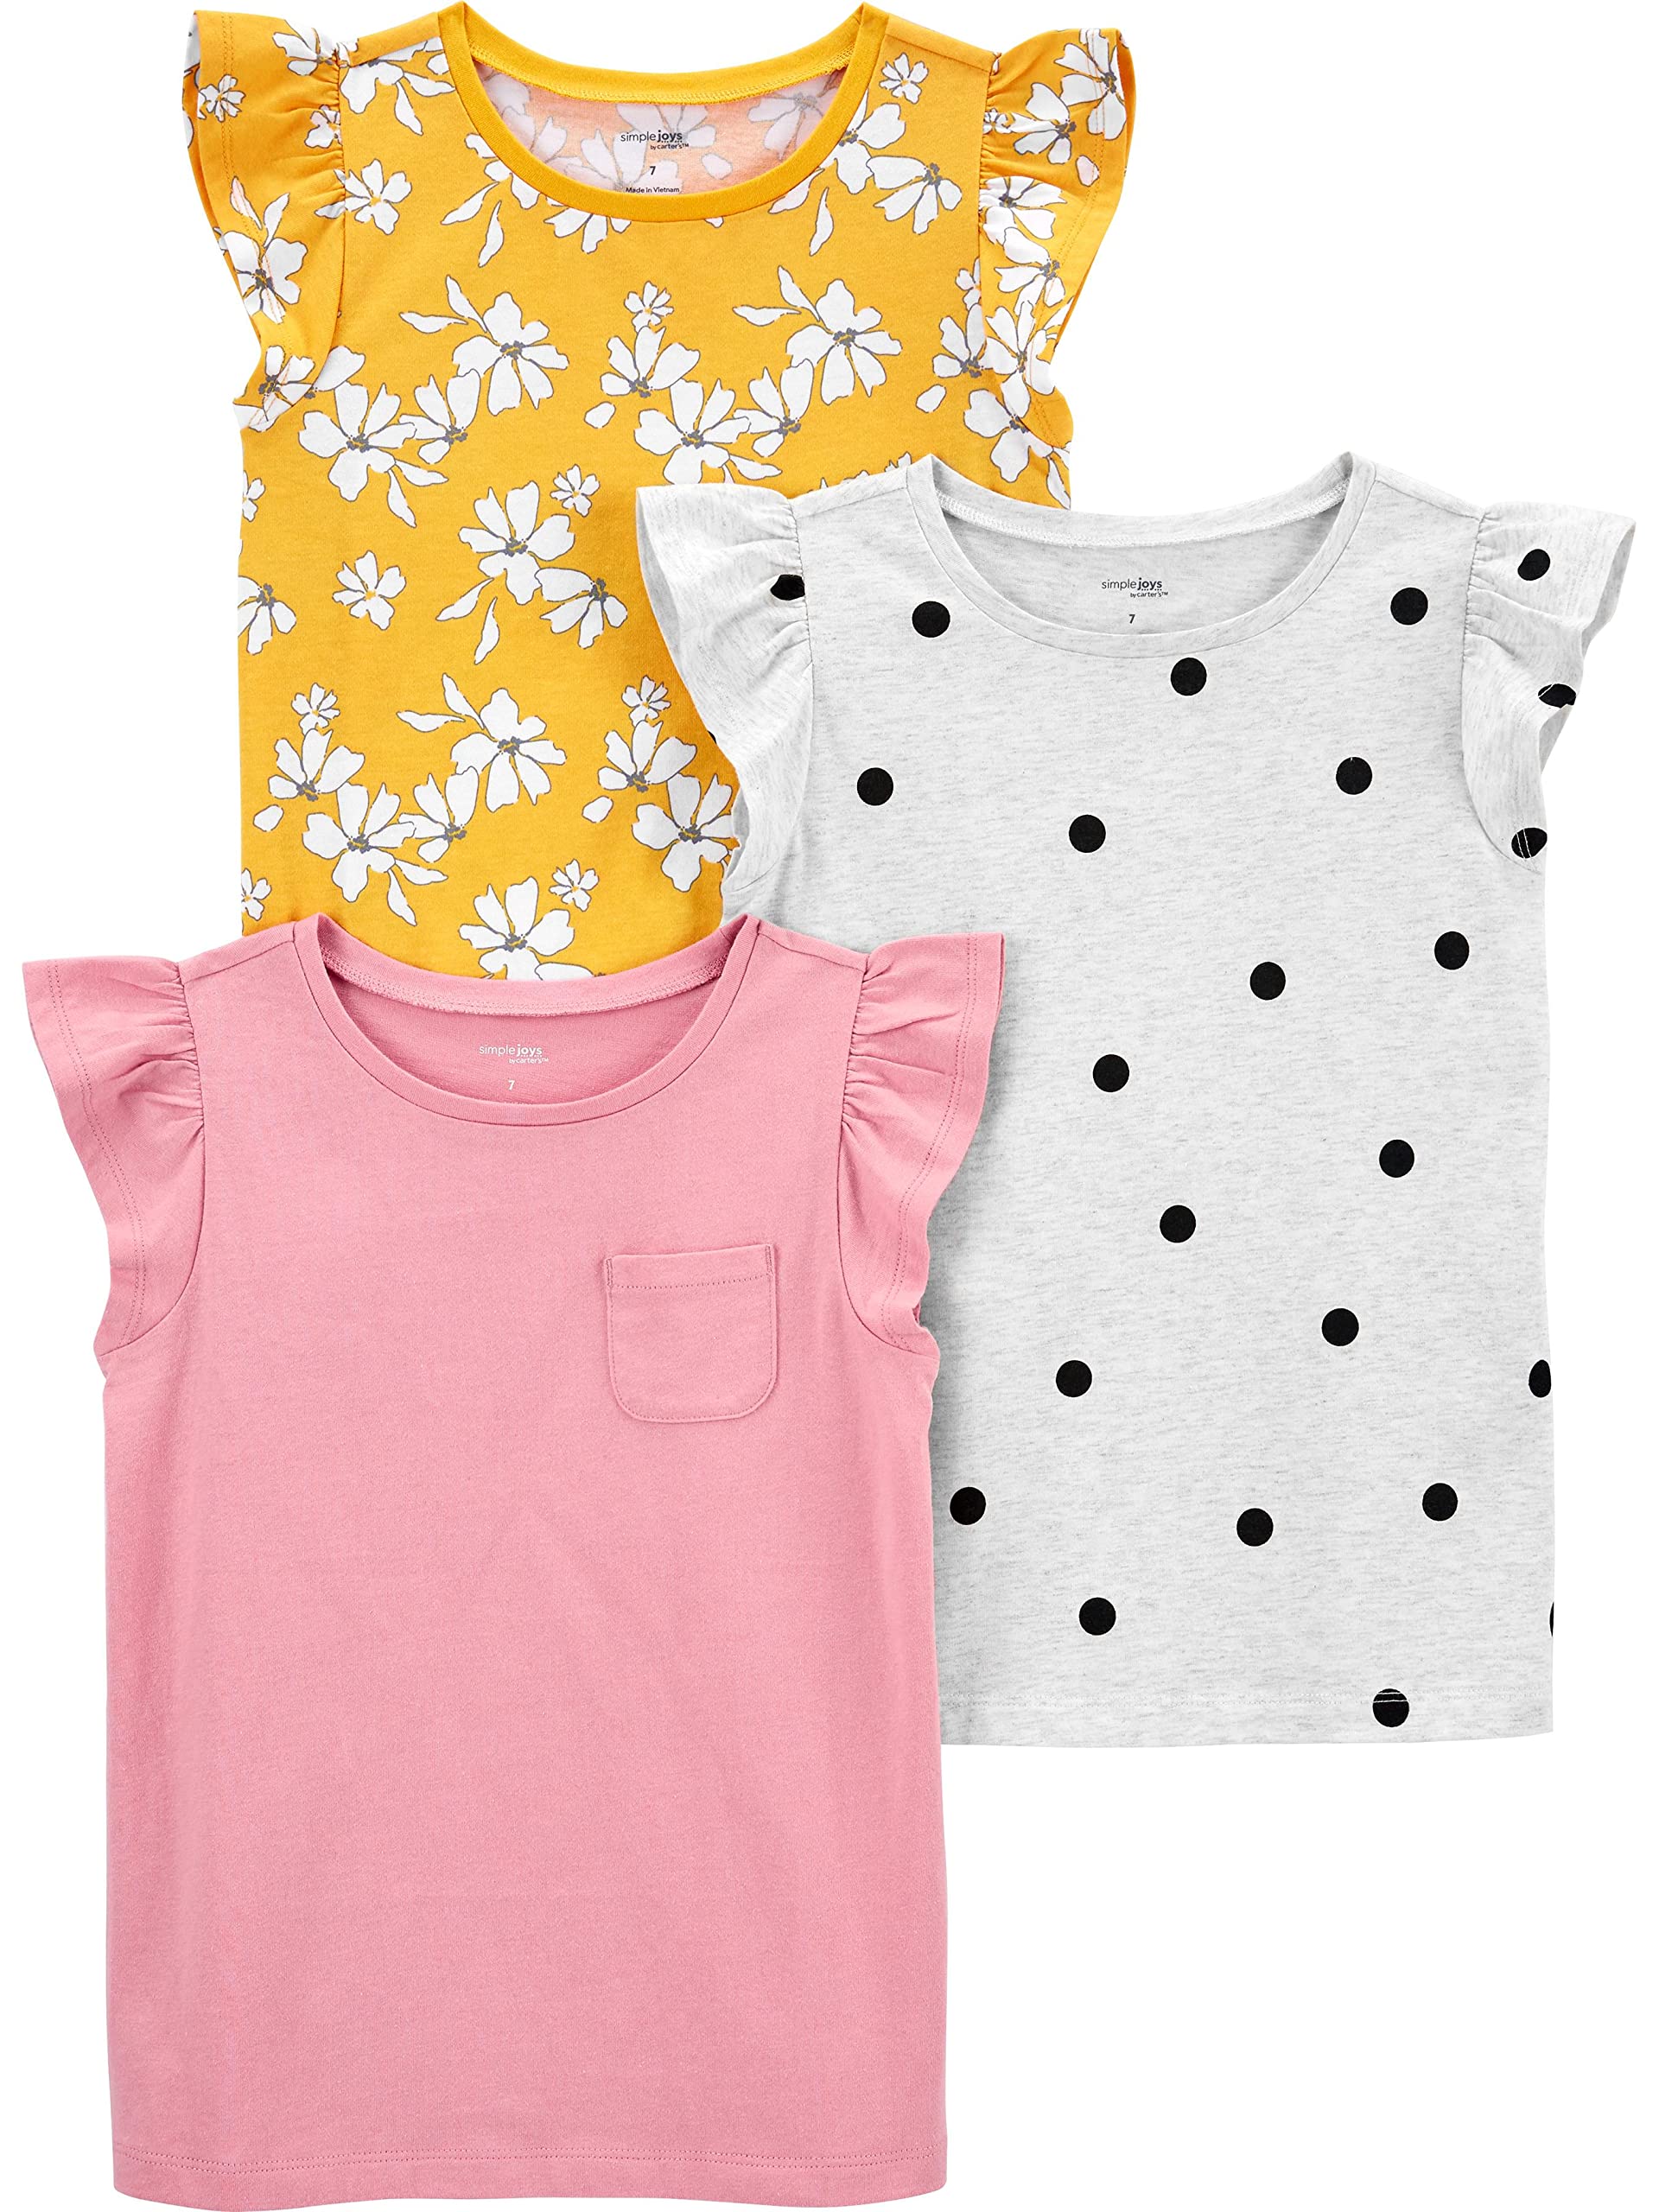 Simple Joys by Carter's Girls' Short-Sleeve Shirts and Tops, Mulitpacks